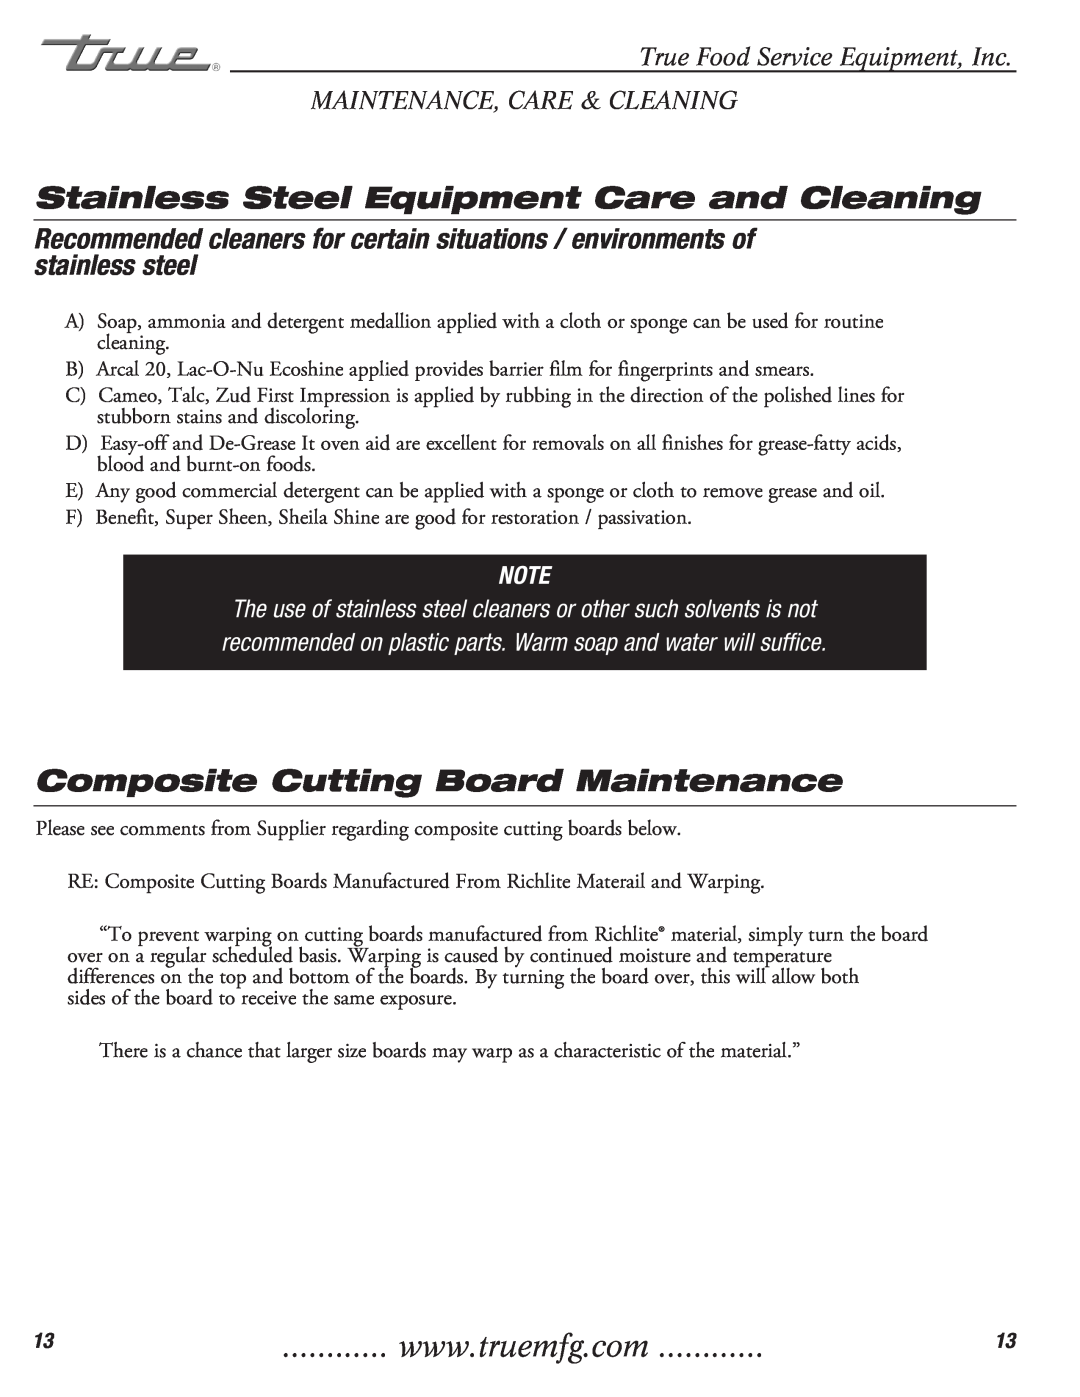 True Manufacturing Company TFP-32-12M-D-2 Composite Cutting Board Maintenance, Stainless Steel Equipment Care and Cleaning 